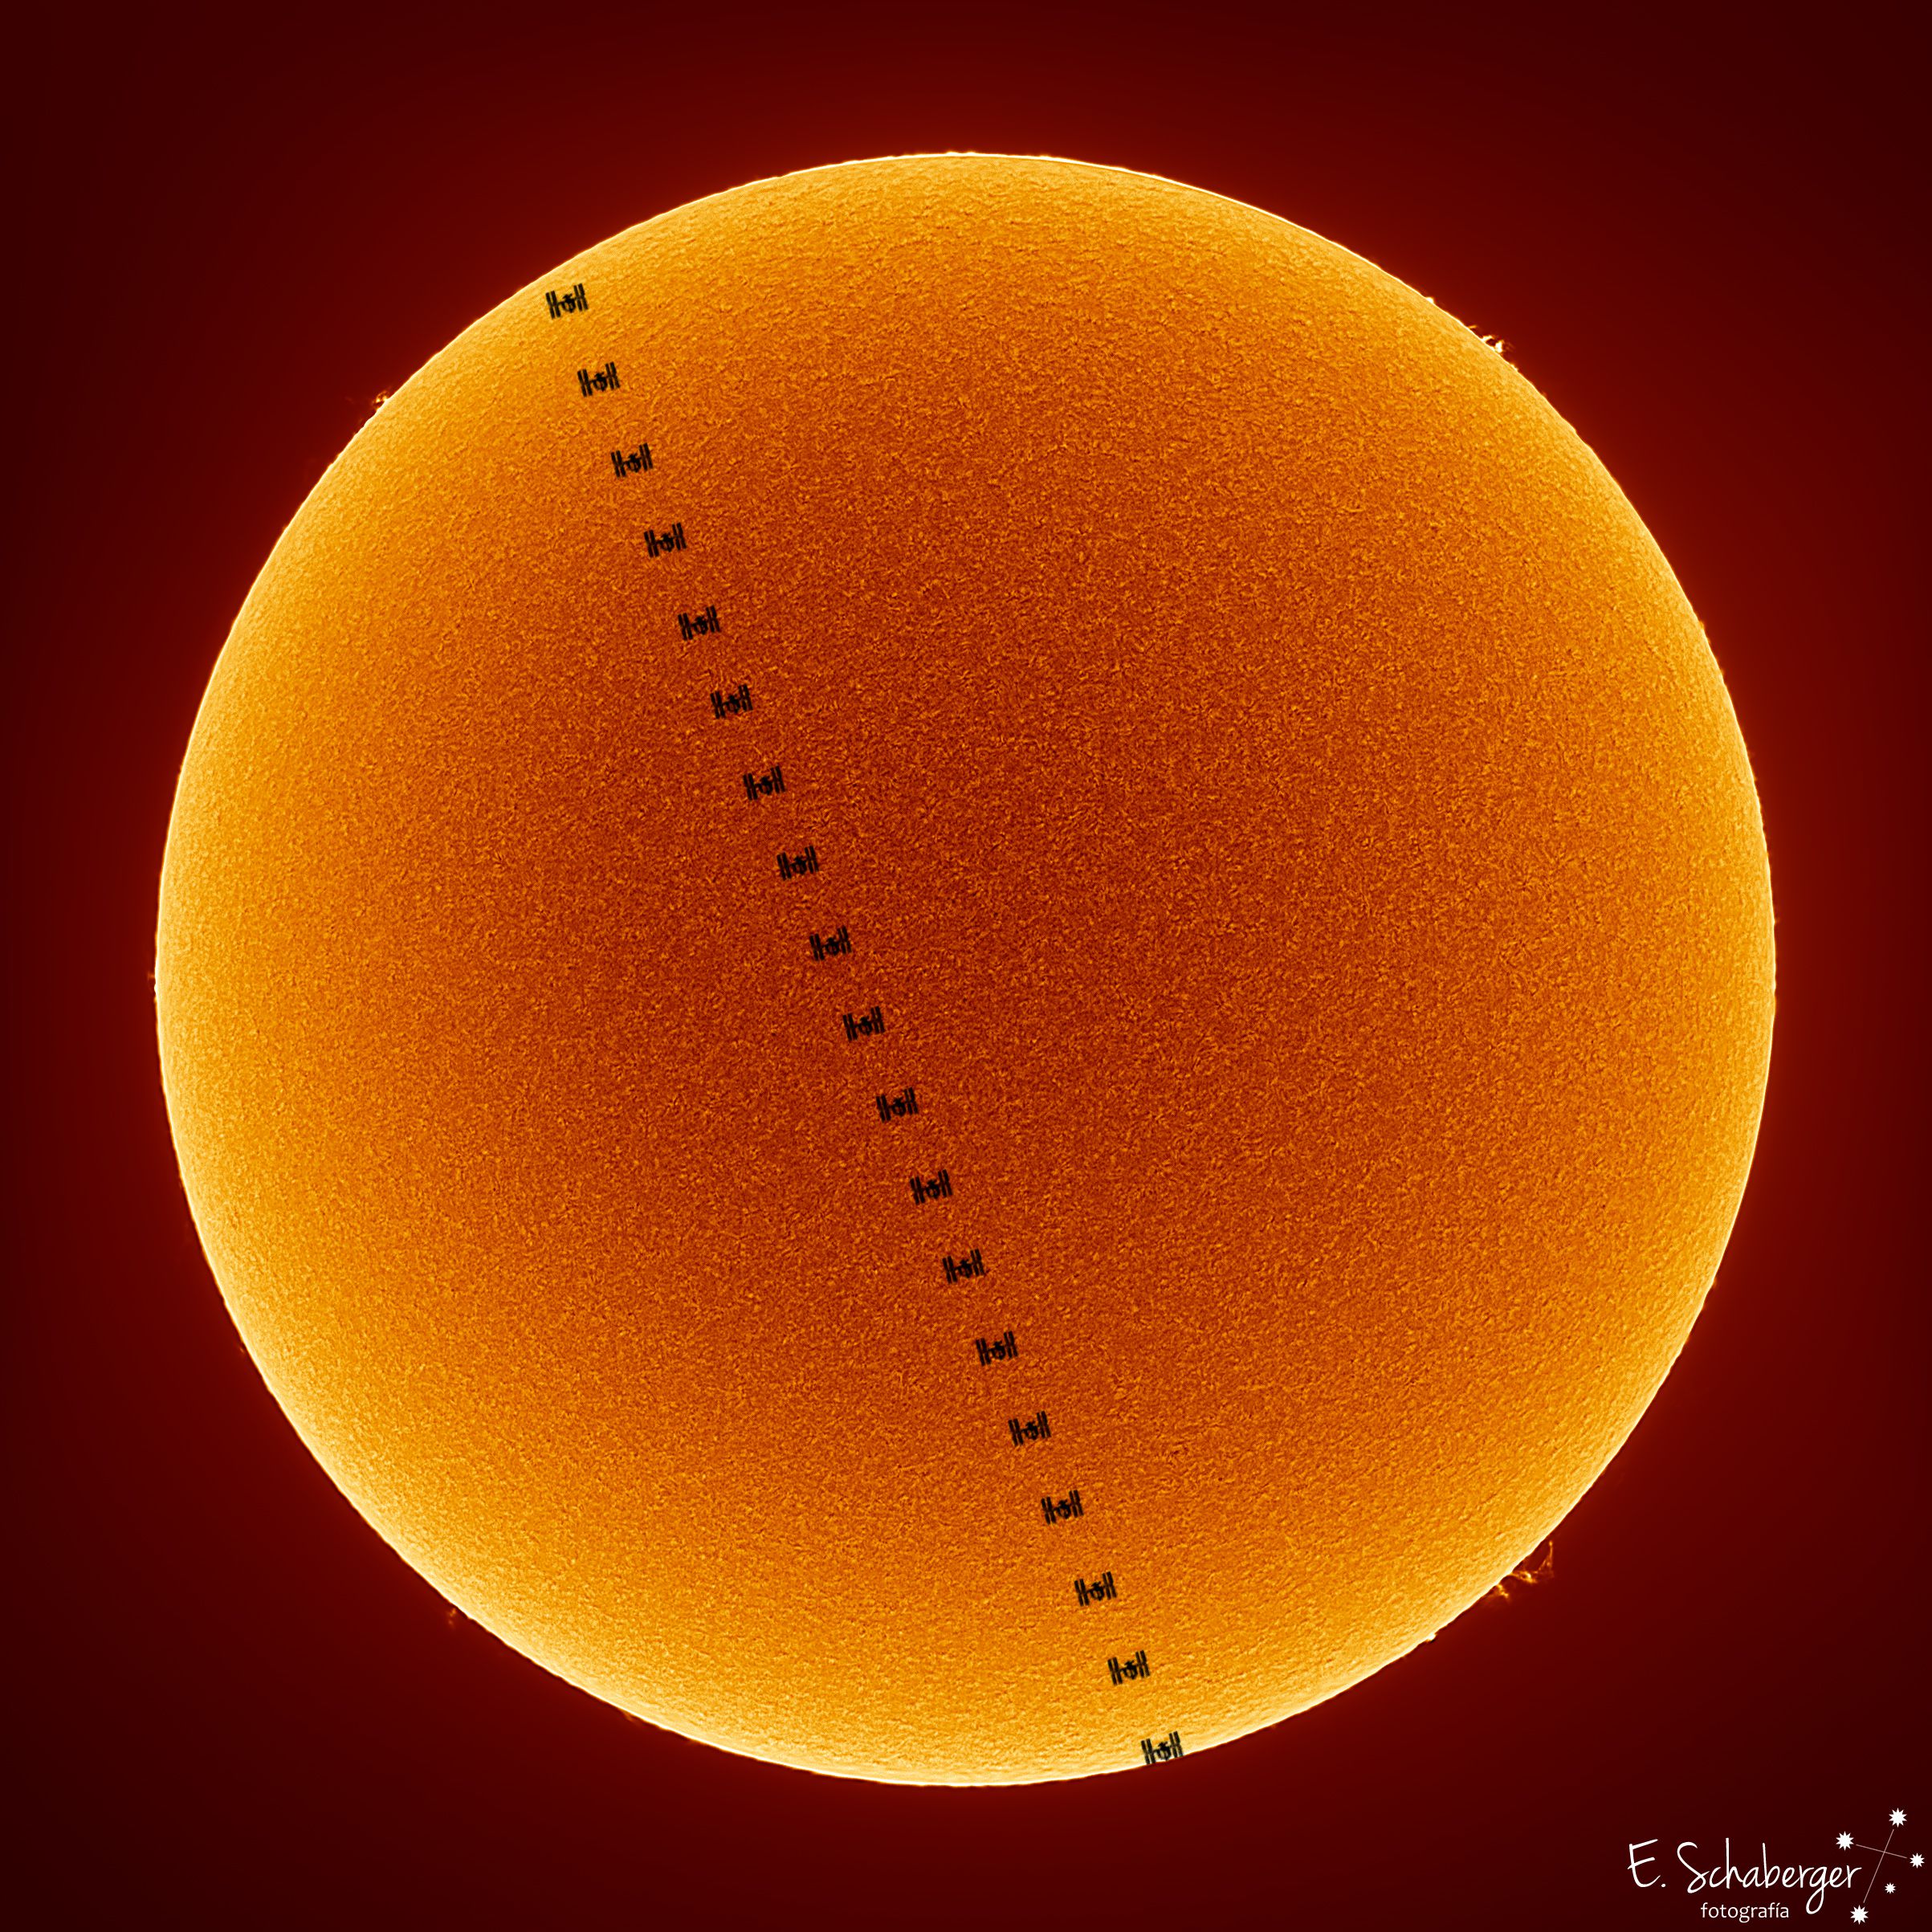  The Space Station Crosses a Spotless Sun 